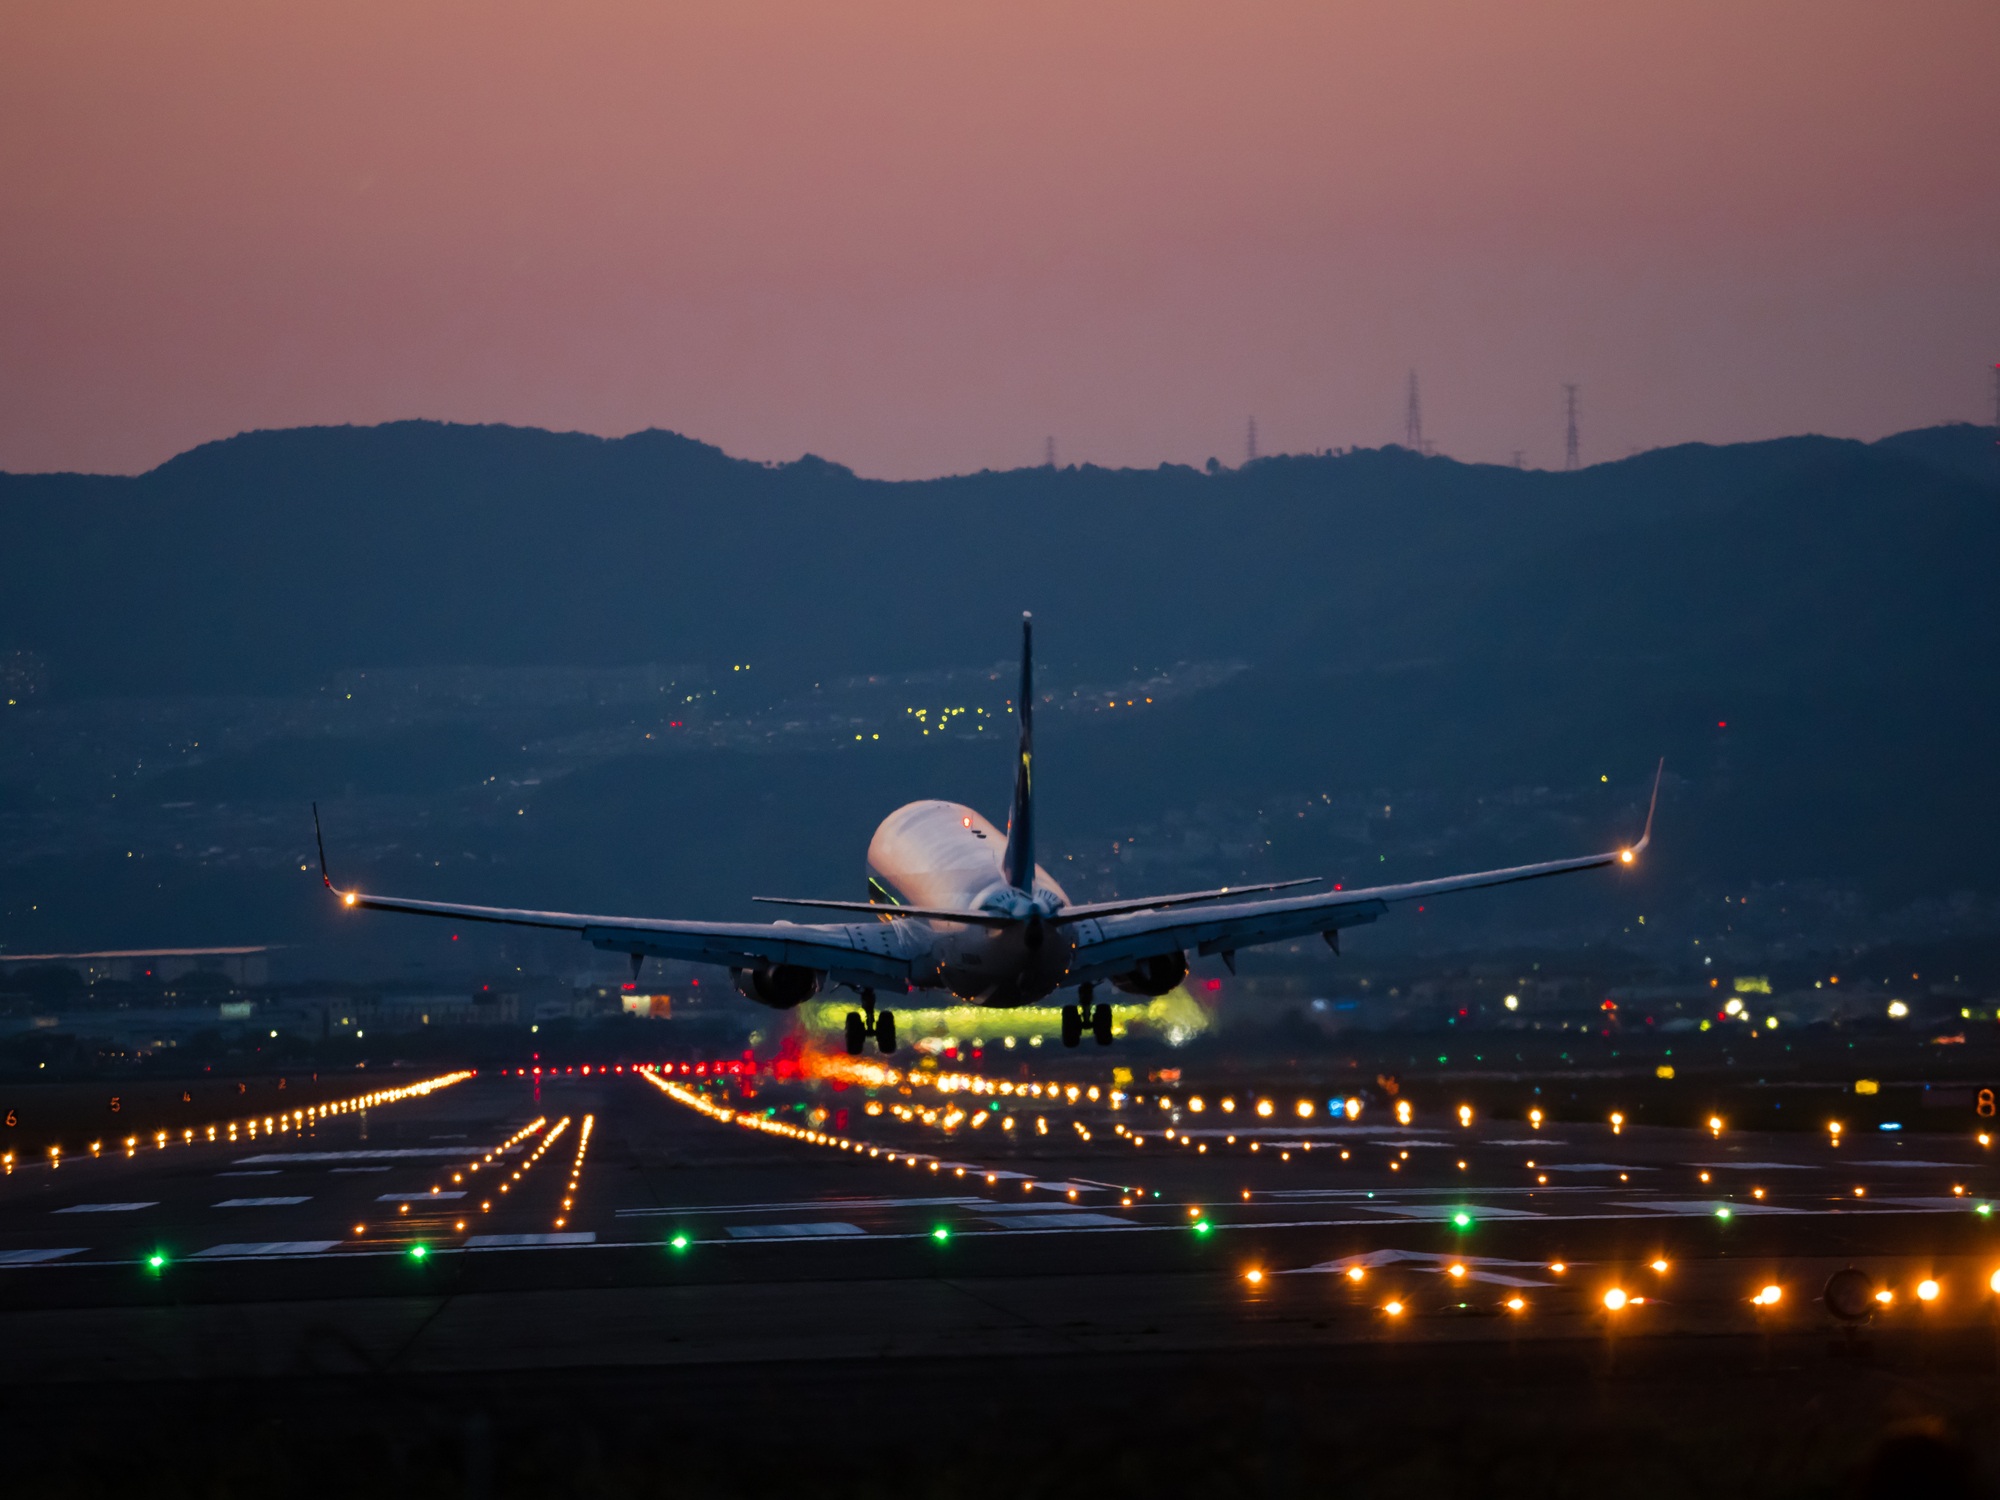 Plane landing on the runway at night with lights and a sunset